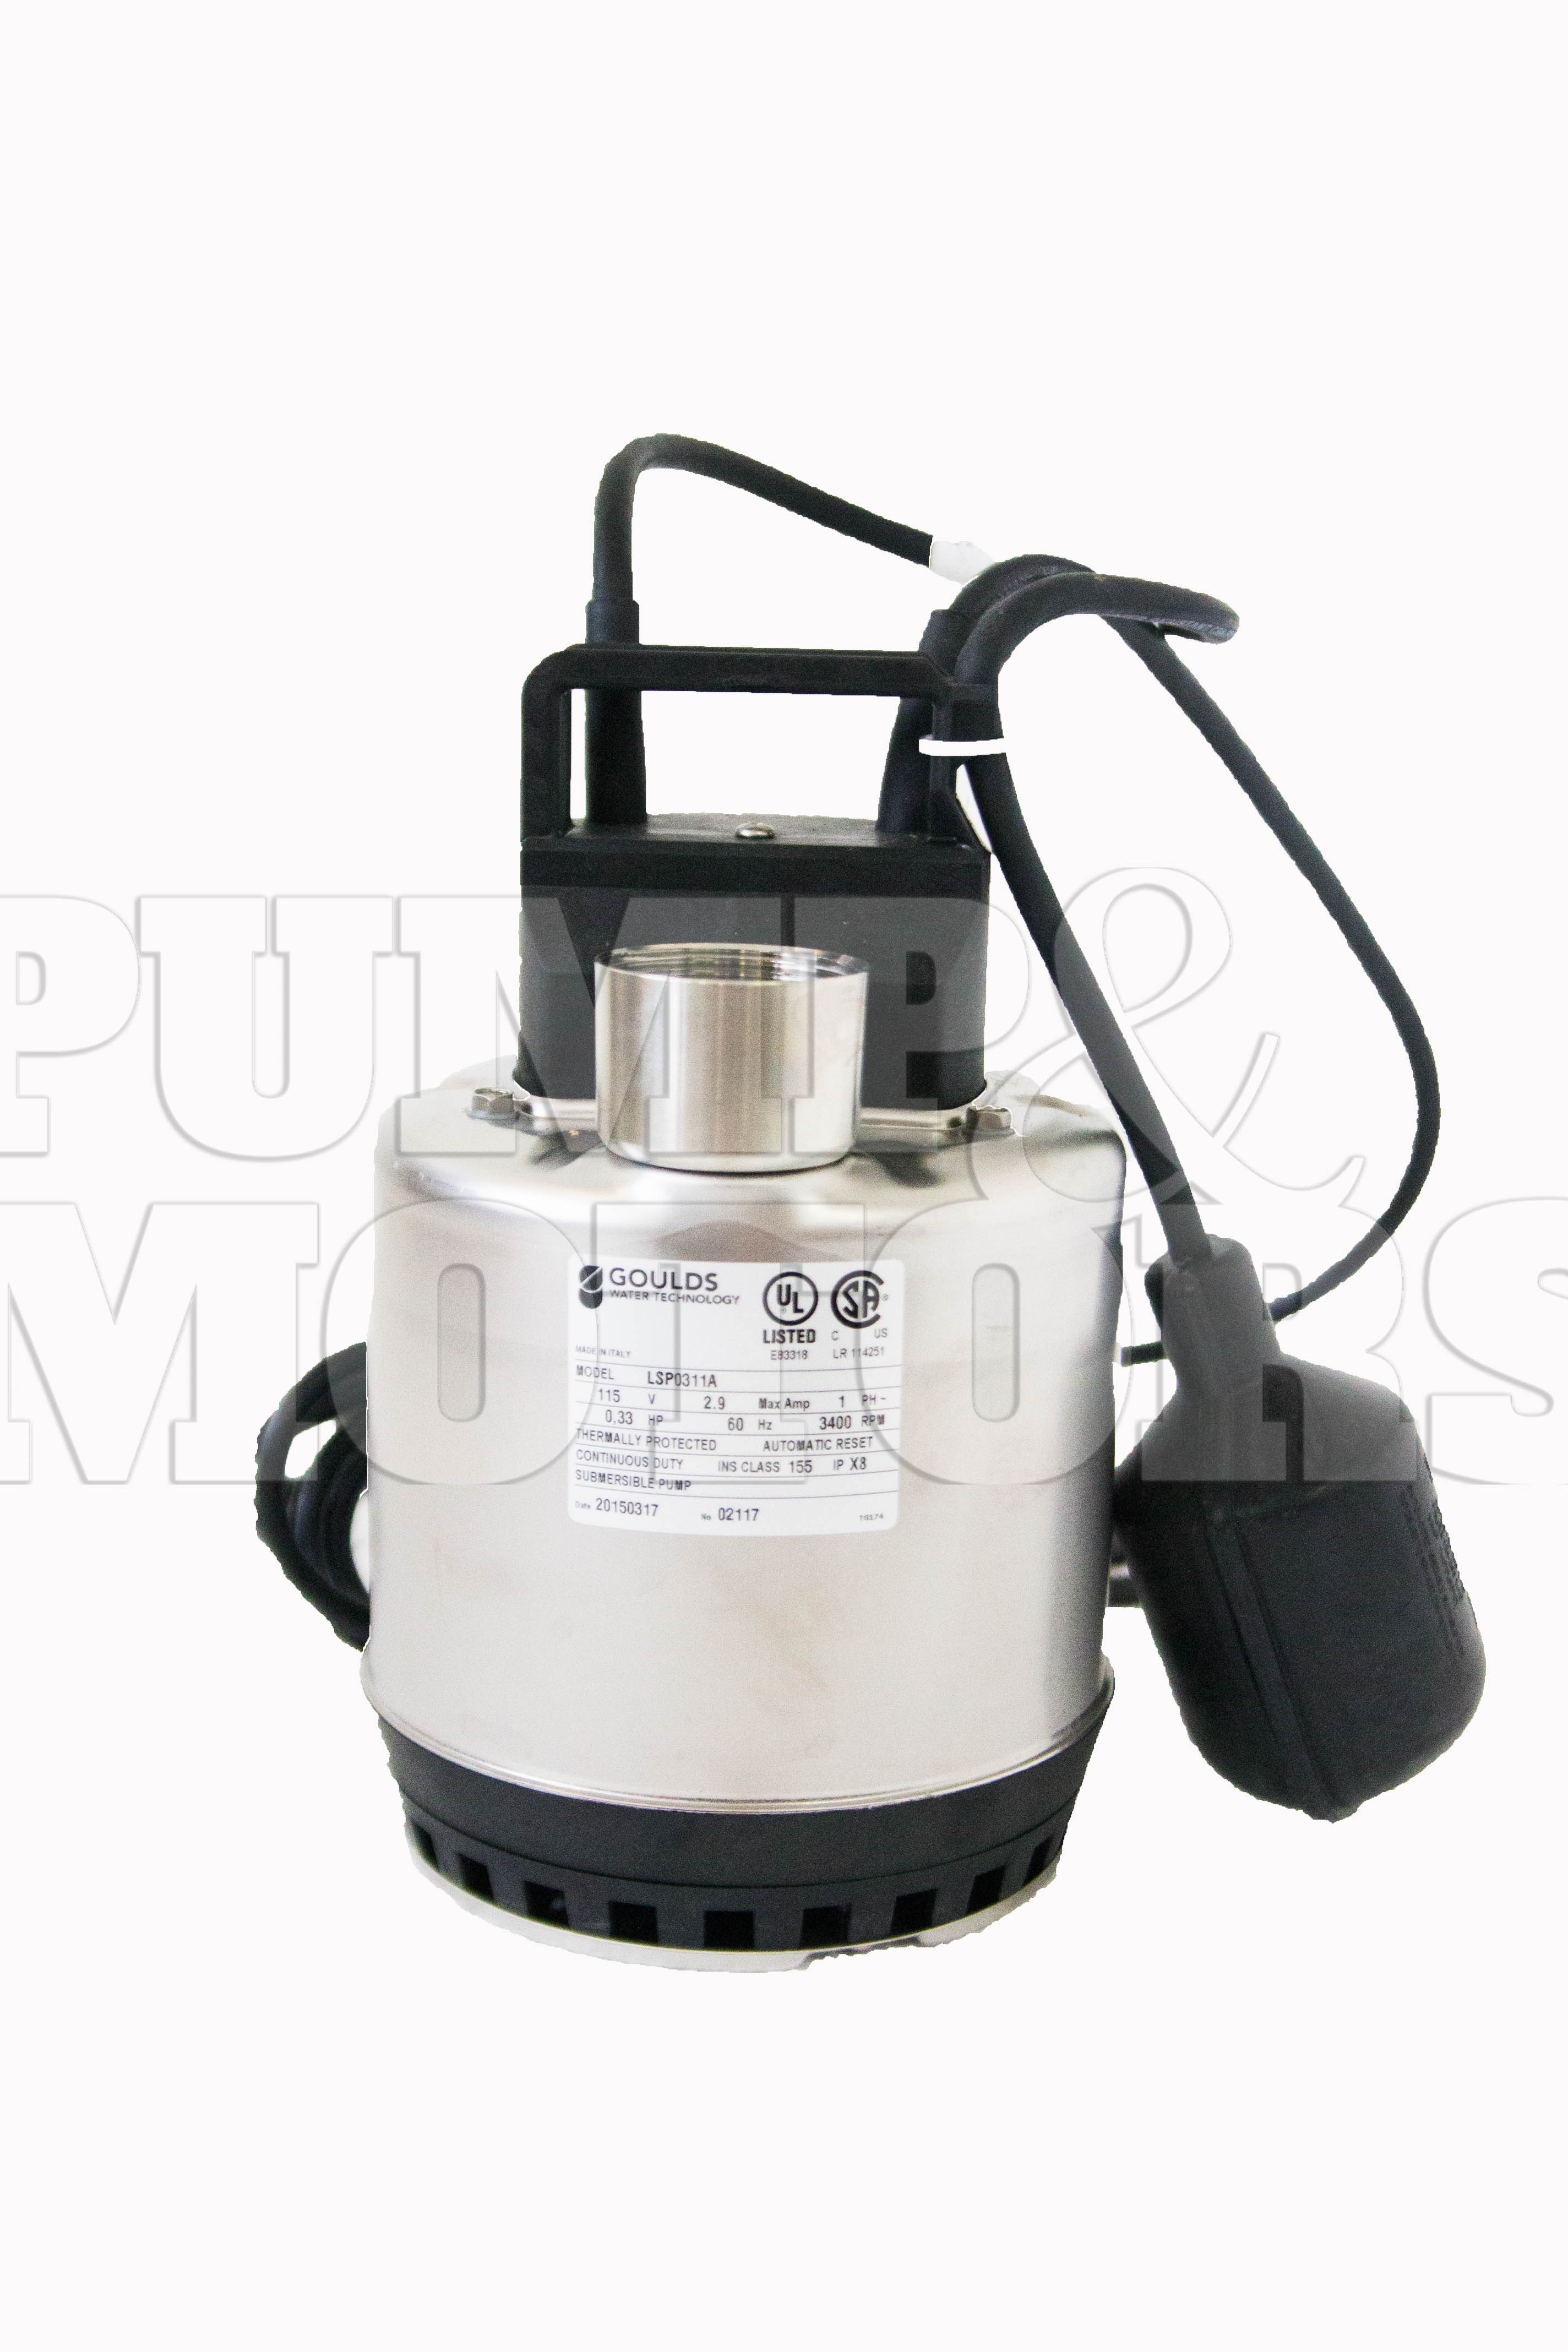 Goulds Water Technology Submersible Sump Pump .75HP 230V 1-1/2" NPT LSP0712F 